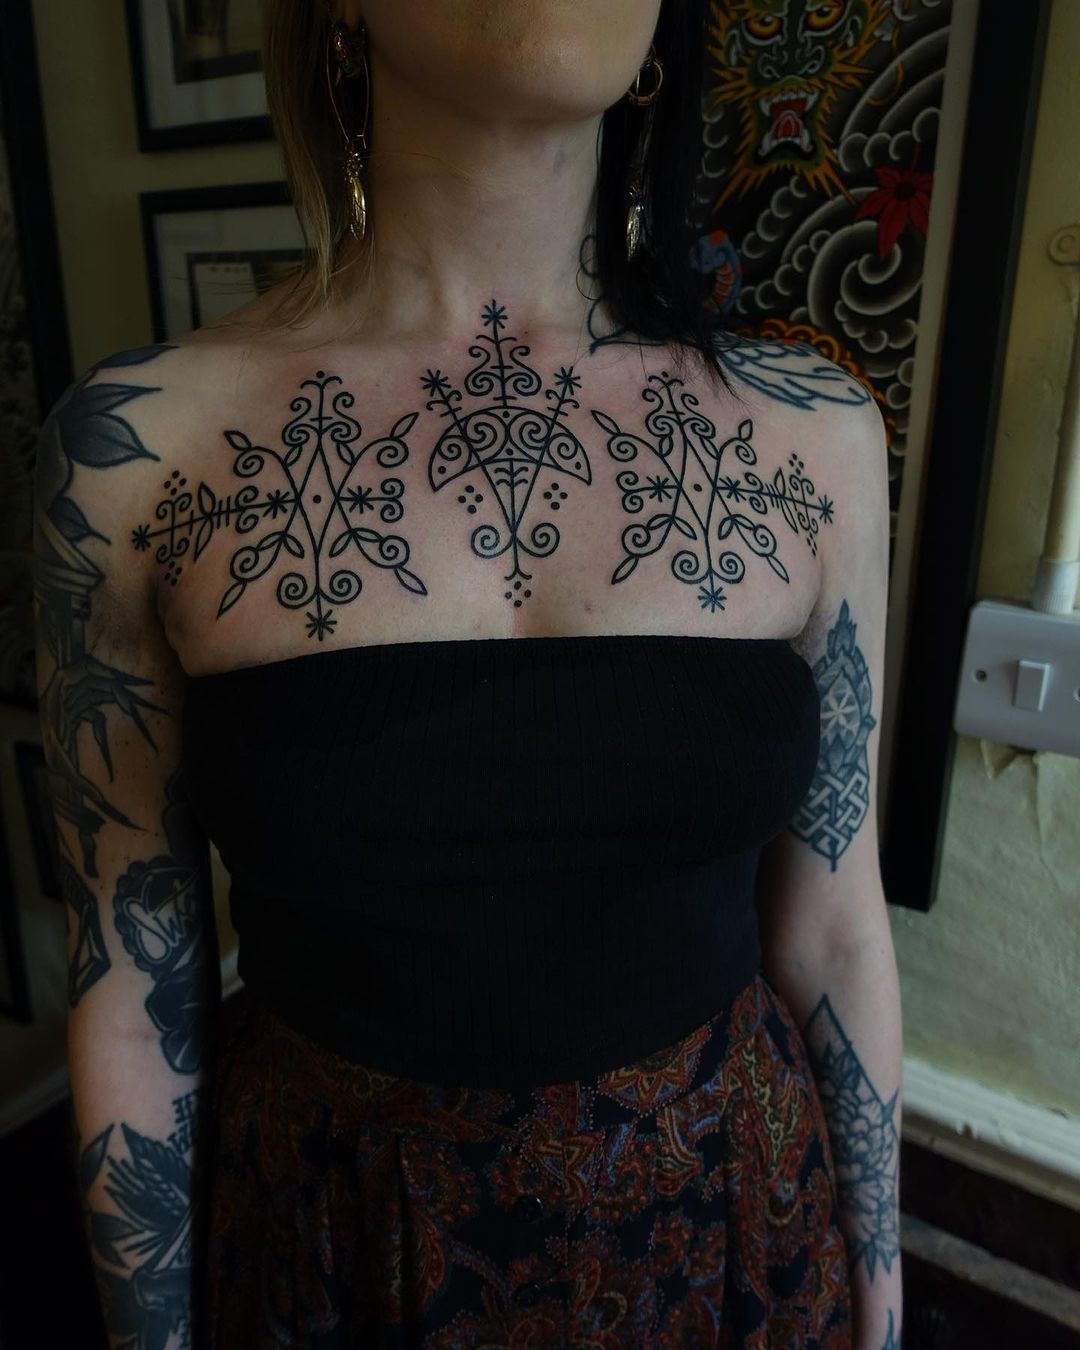 300 Celtic Tattoos And Meanings To Show Off Your Heritage